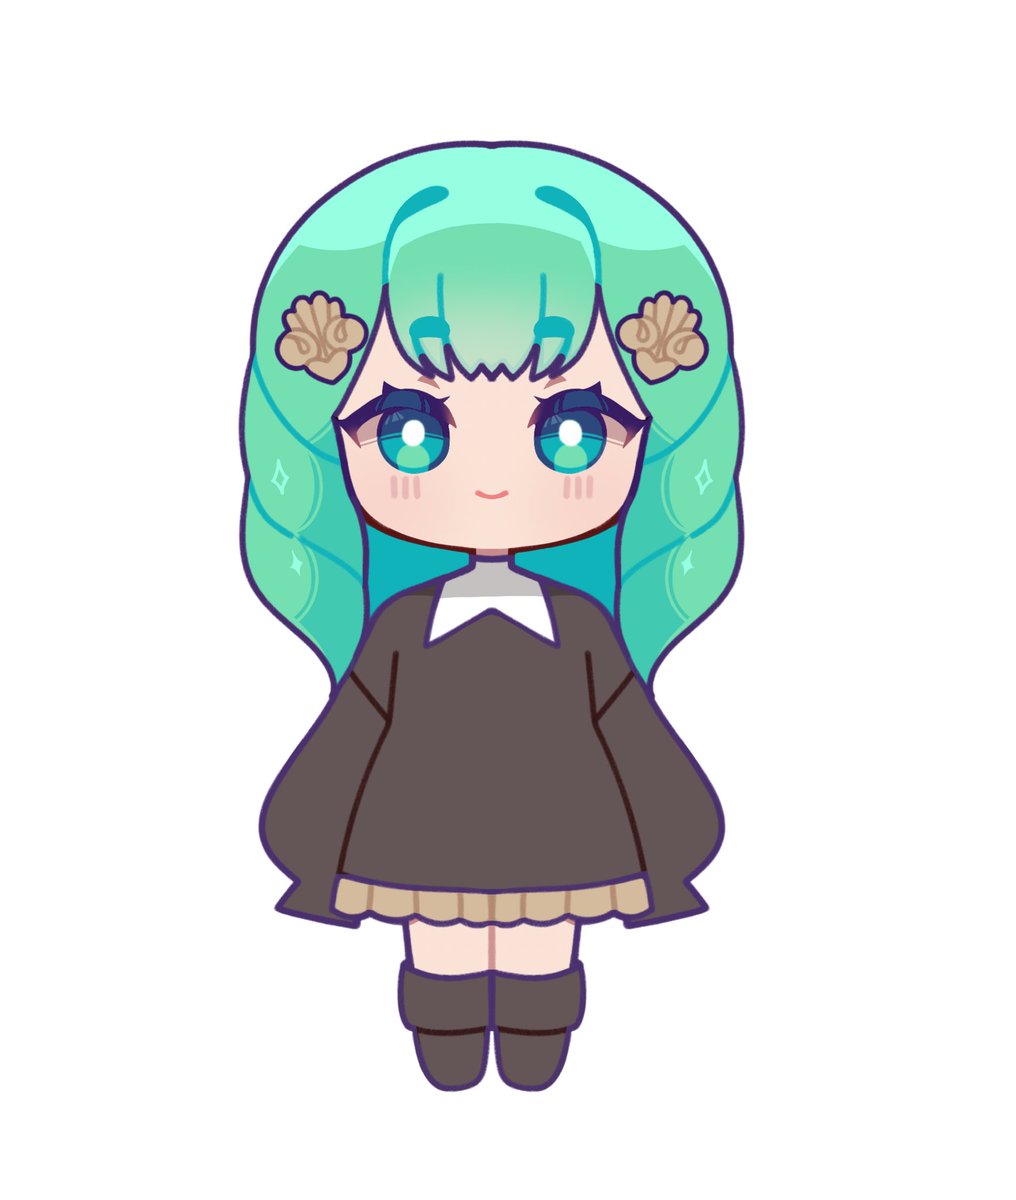 I was up all night reworking how I draw chibis

Have a flayn

#FE3H